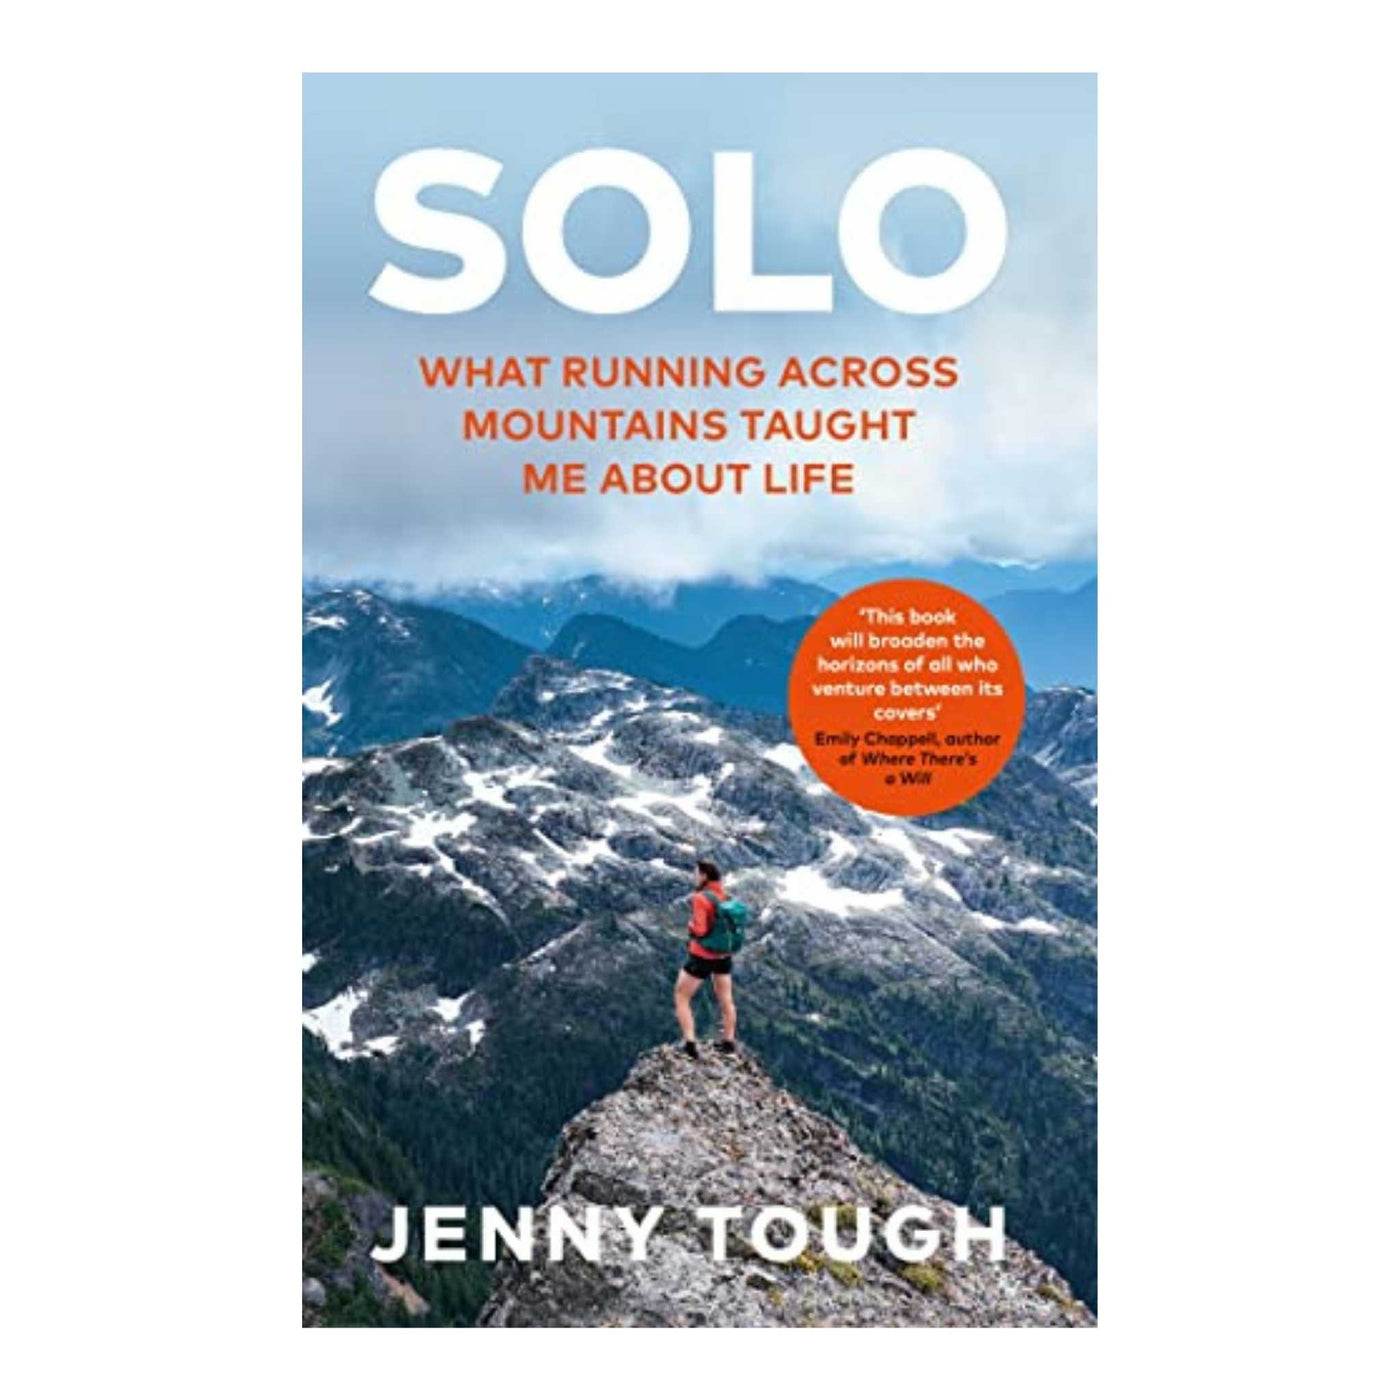 Solo By Jenny Tough | Climbing Adventure Book NZ | Further Faster Christchurch NZ